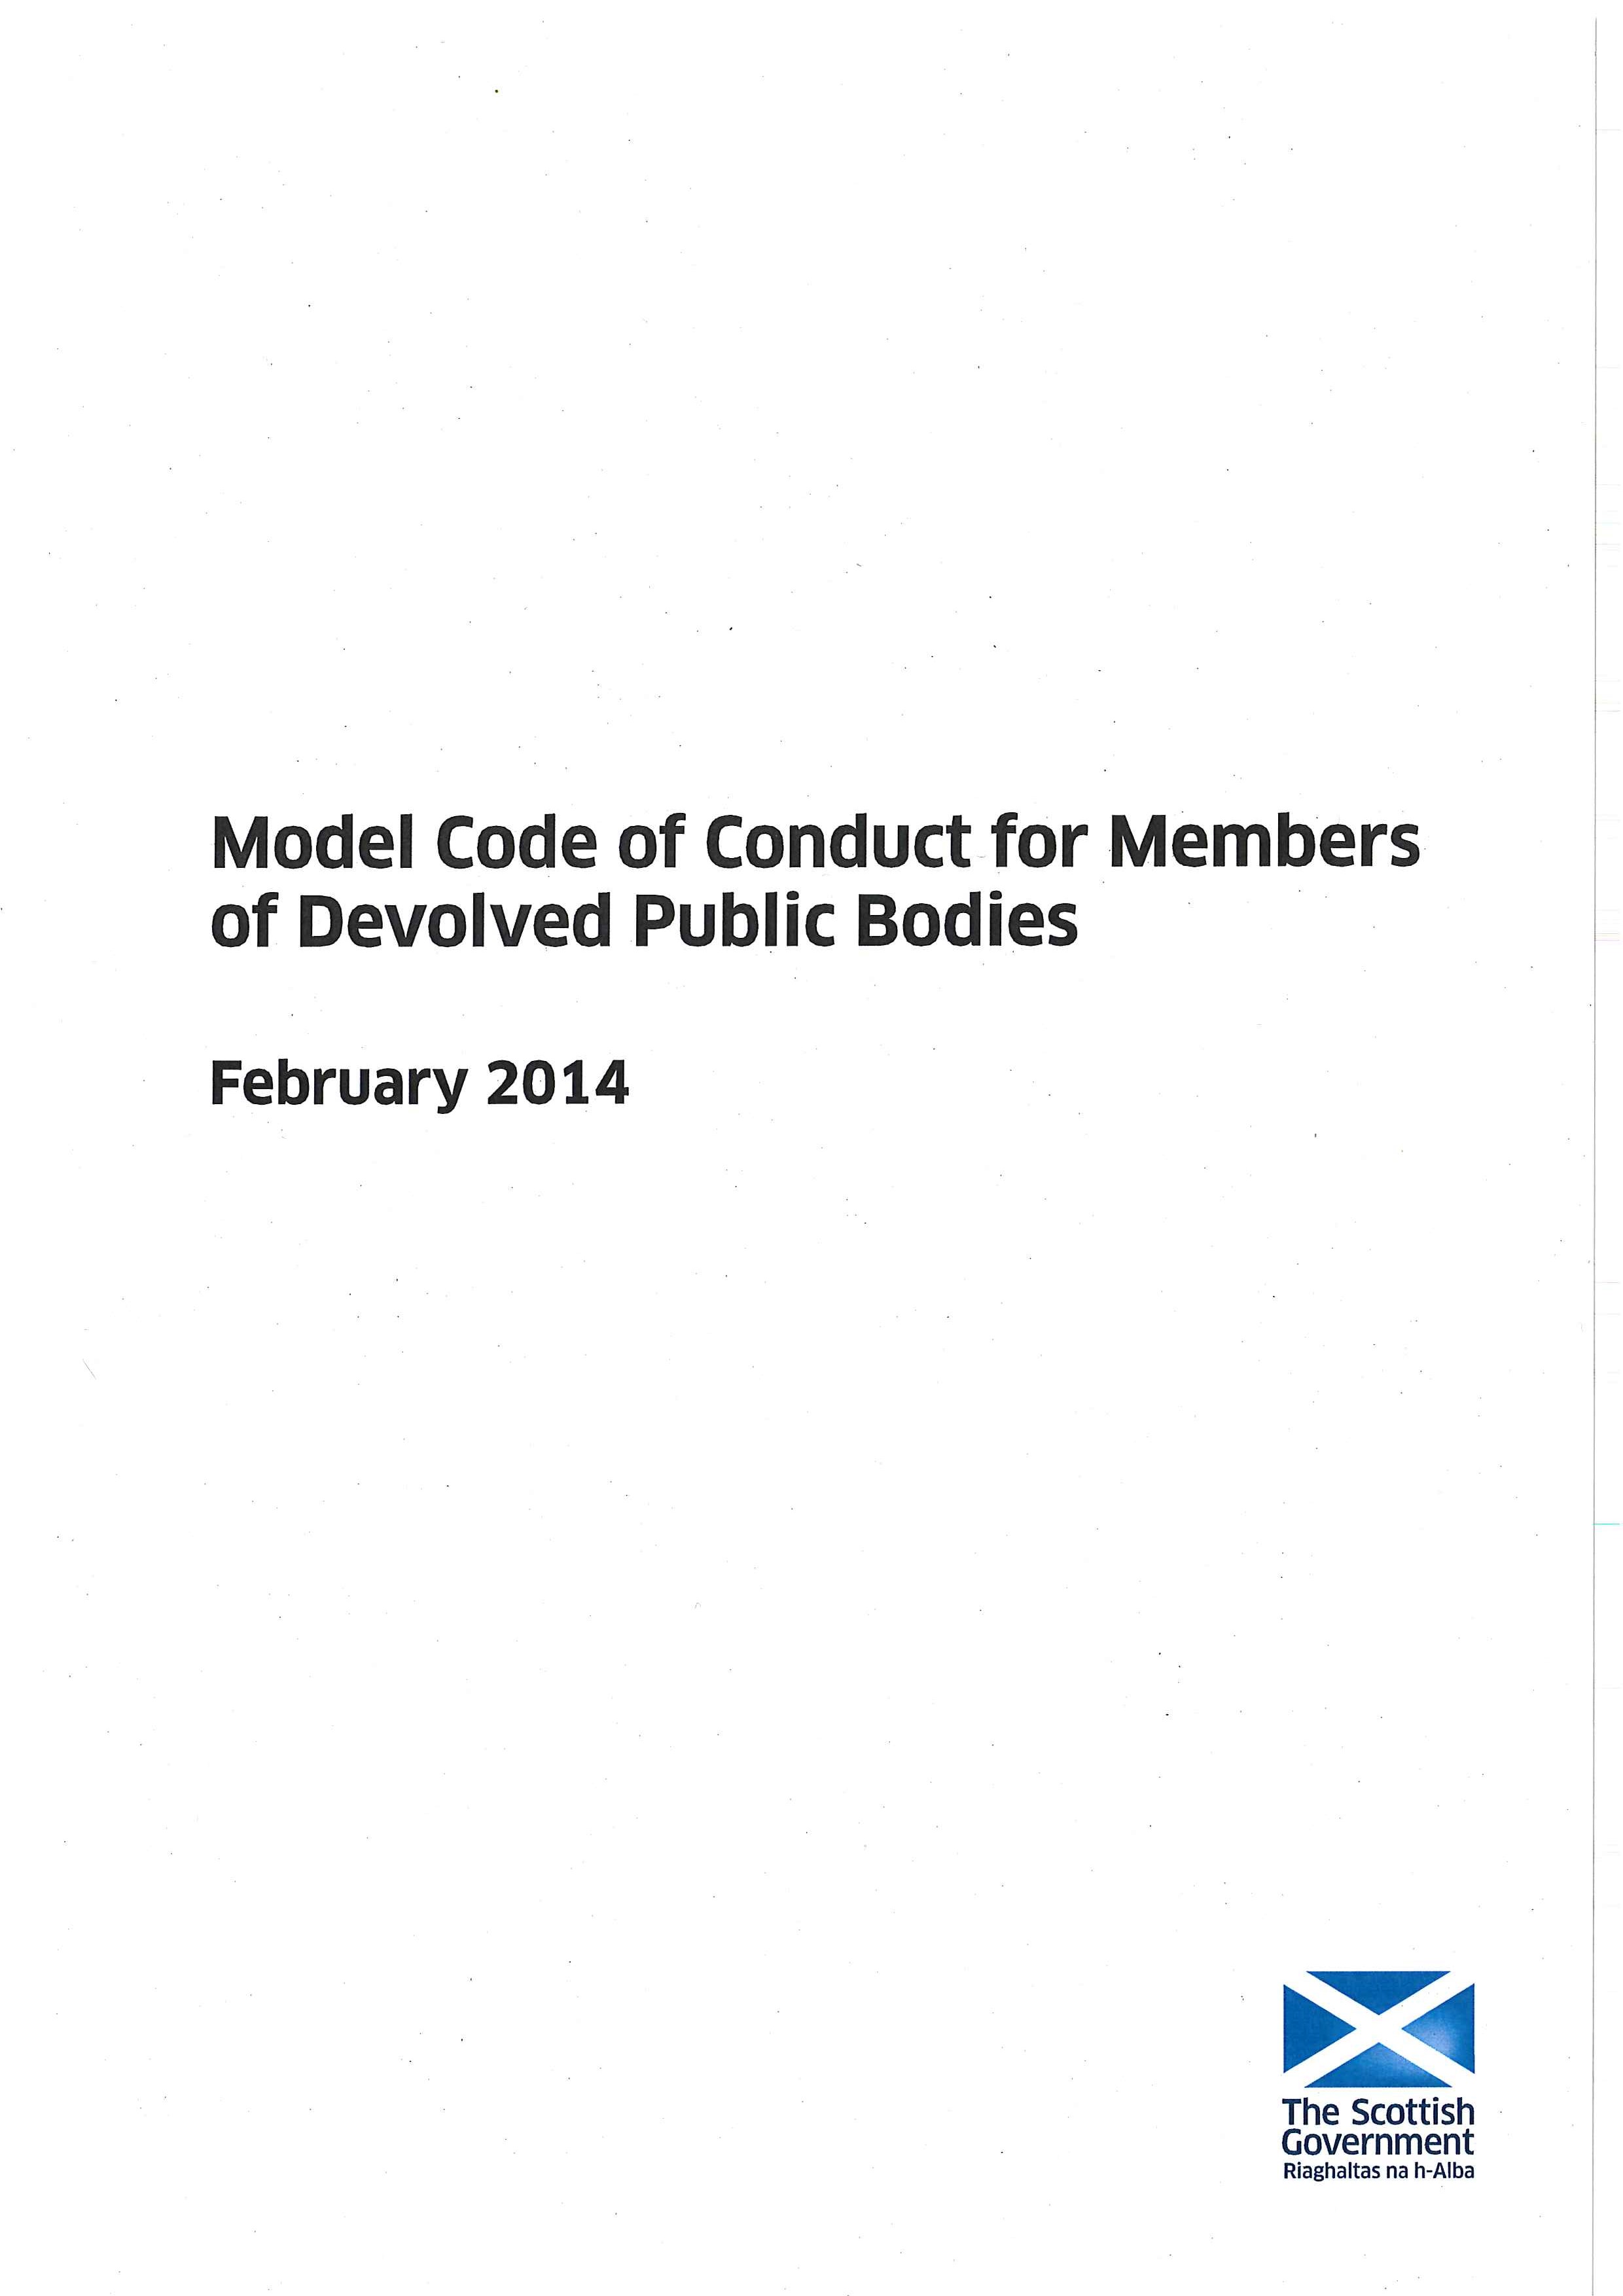 Model Code of Conduct for Members of Boards of Devolved Public Bodies (2014)